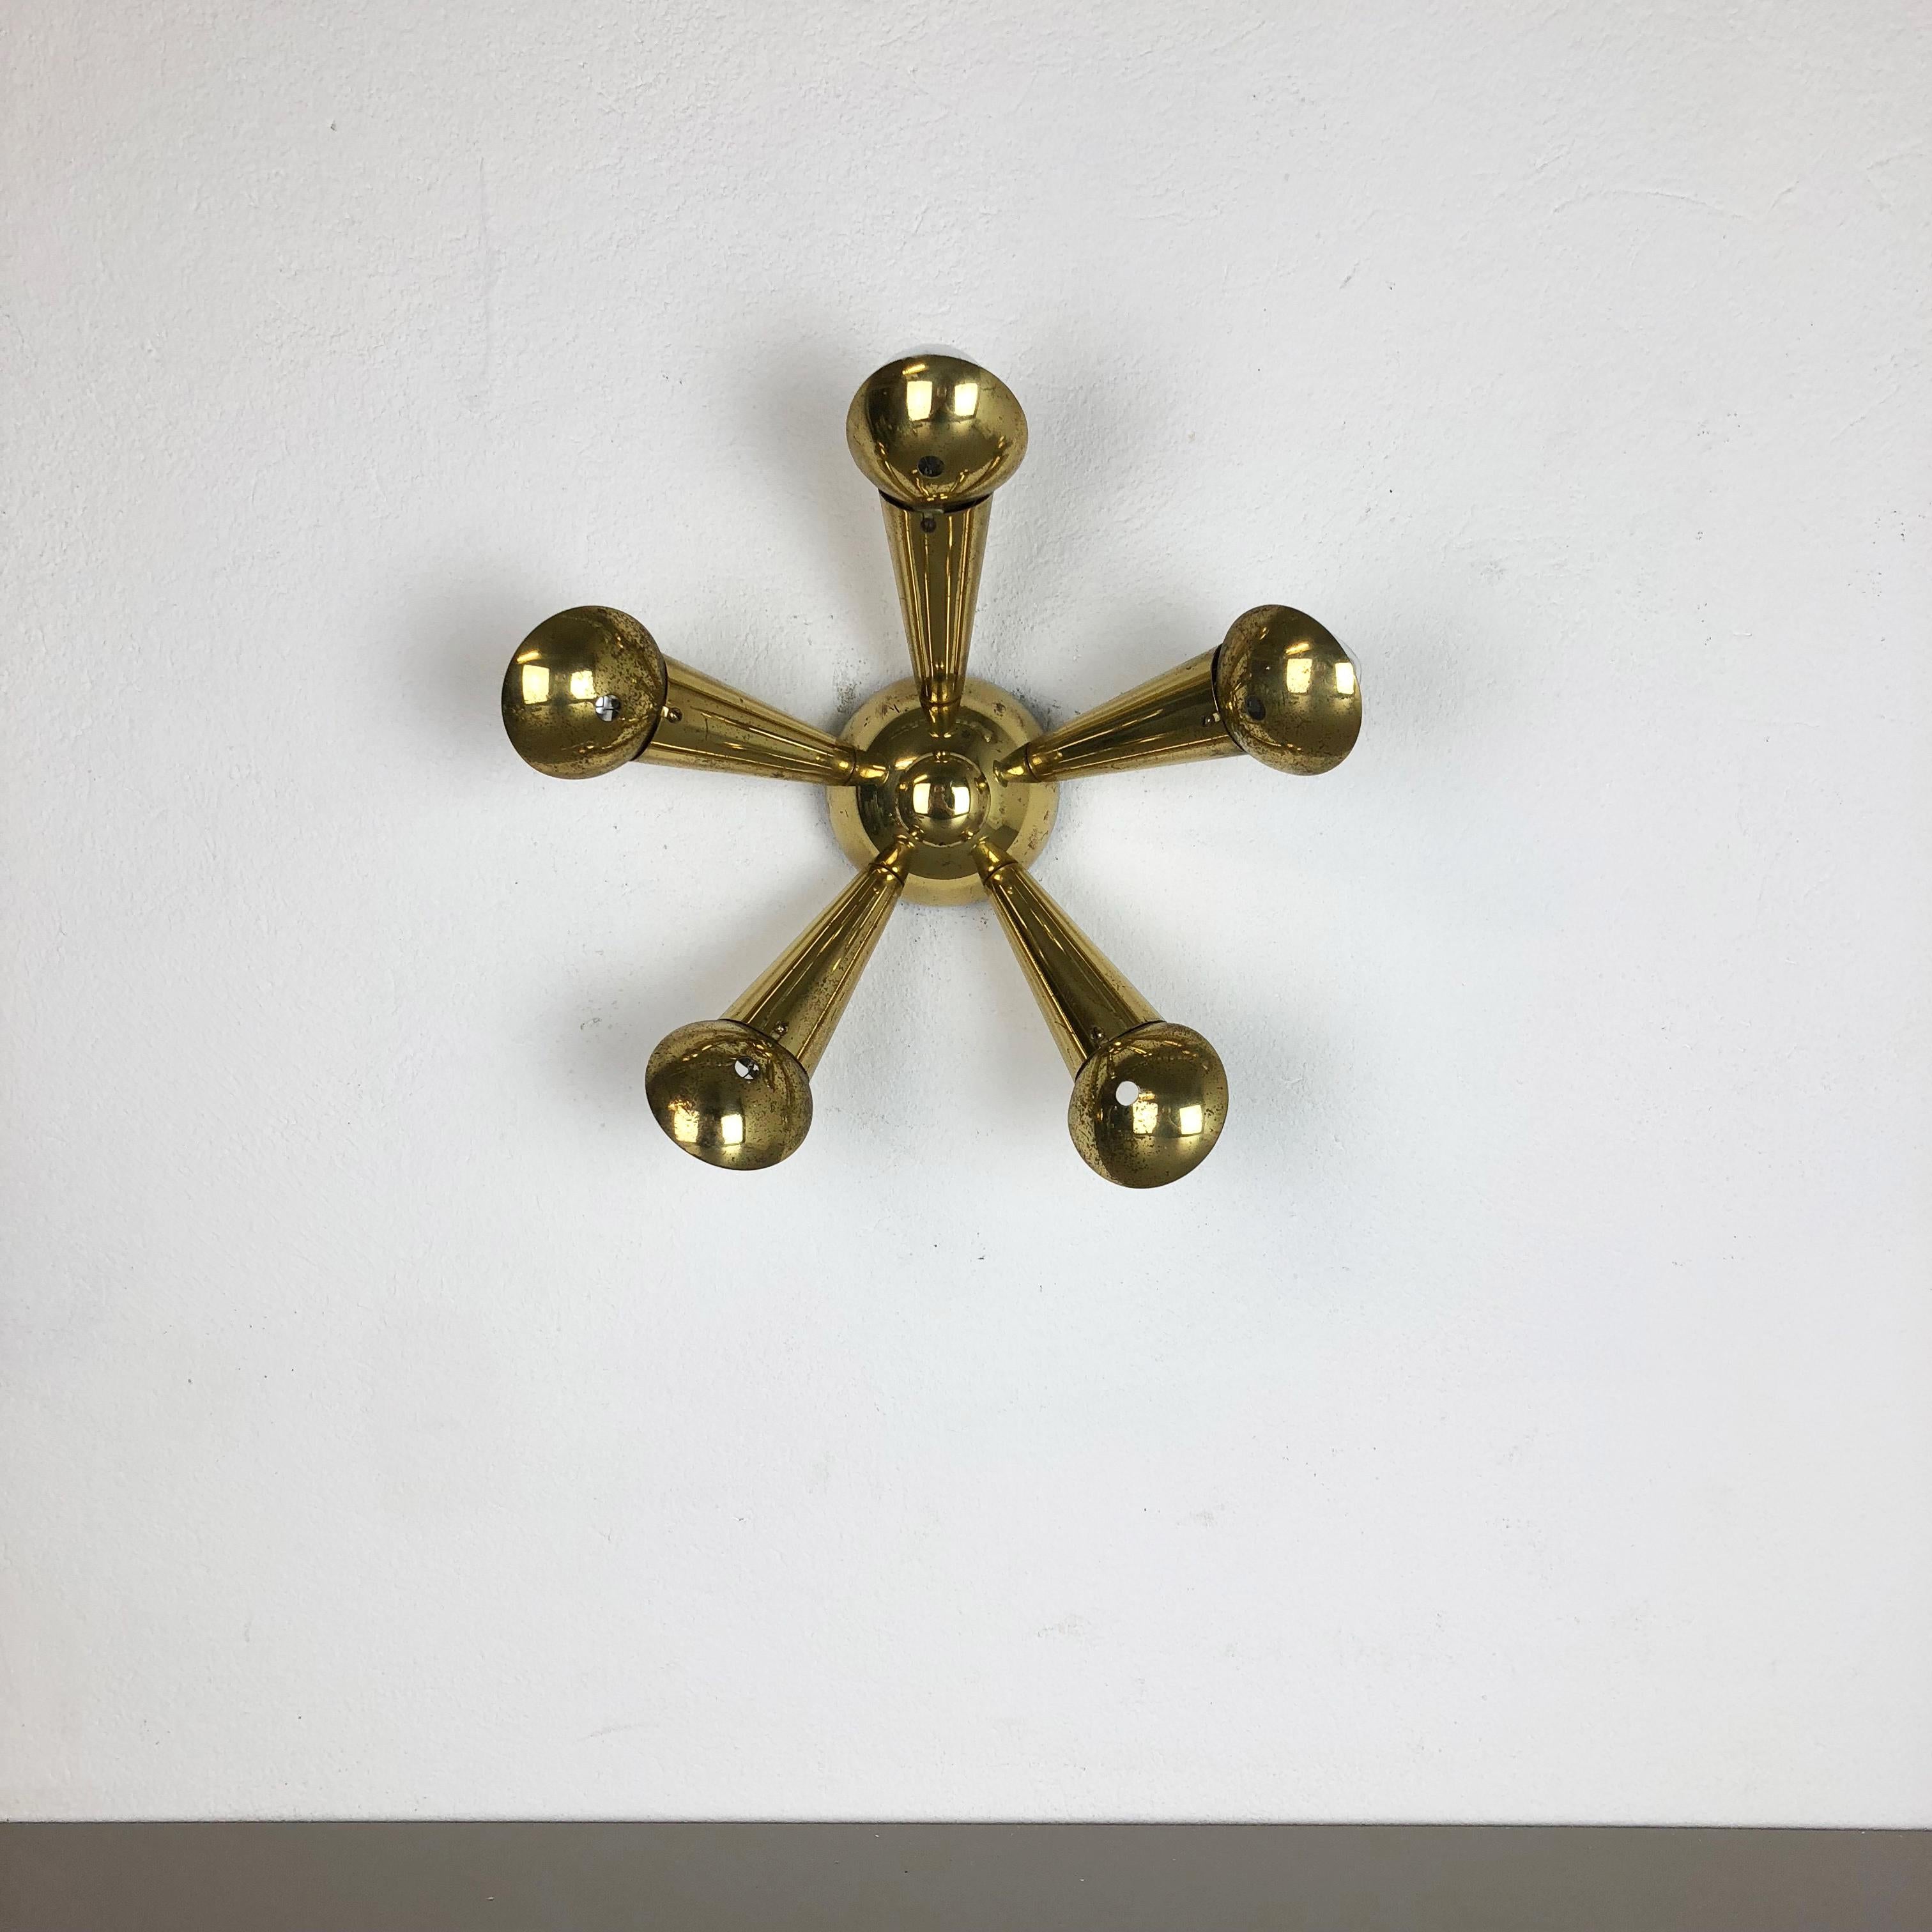 Article:

Wall light ceiling light


Producer:

Origin Italy in the manner of Stilnovo, Gio Ponti



Age:

1950s



This modernist light was produced in Italy in the 1950s. It is made from solid metal brass with brass with five